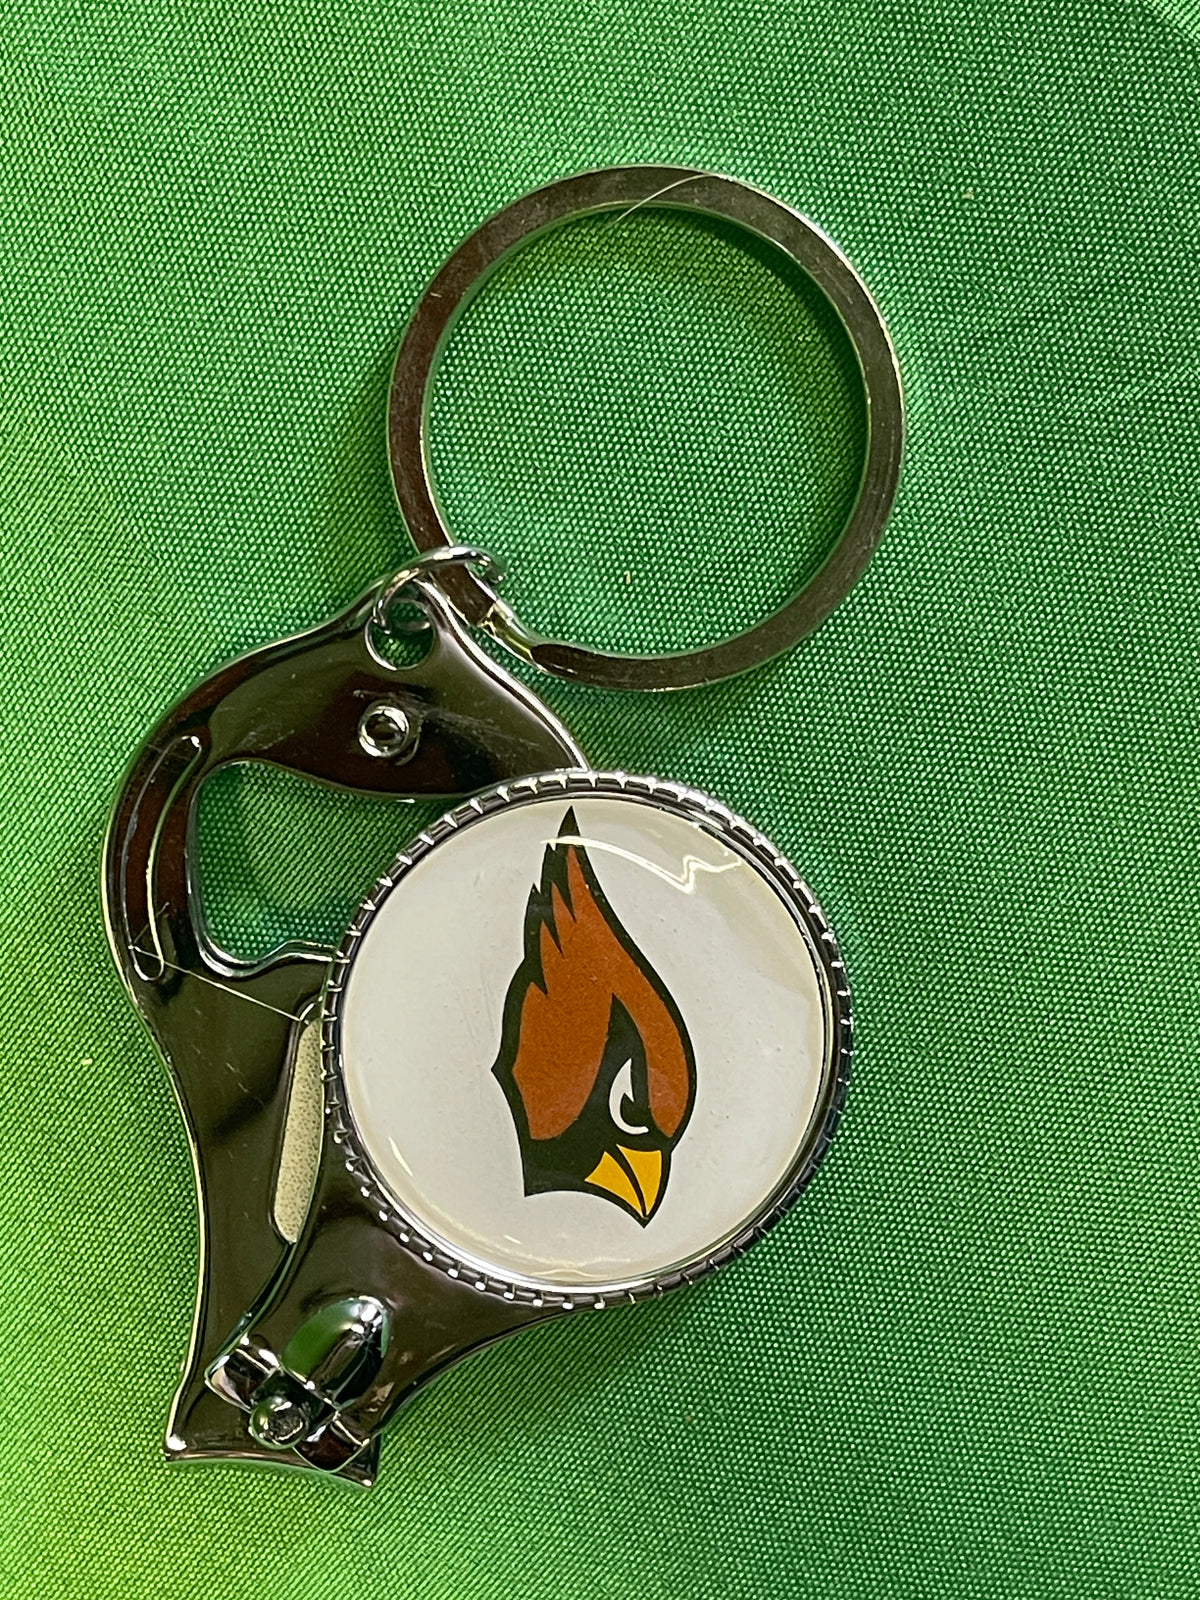 NFL Arizona Cardinals 3-in-1 Keychain Opener Nail Clippers NWT